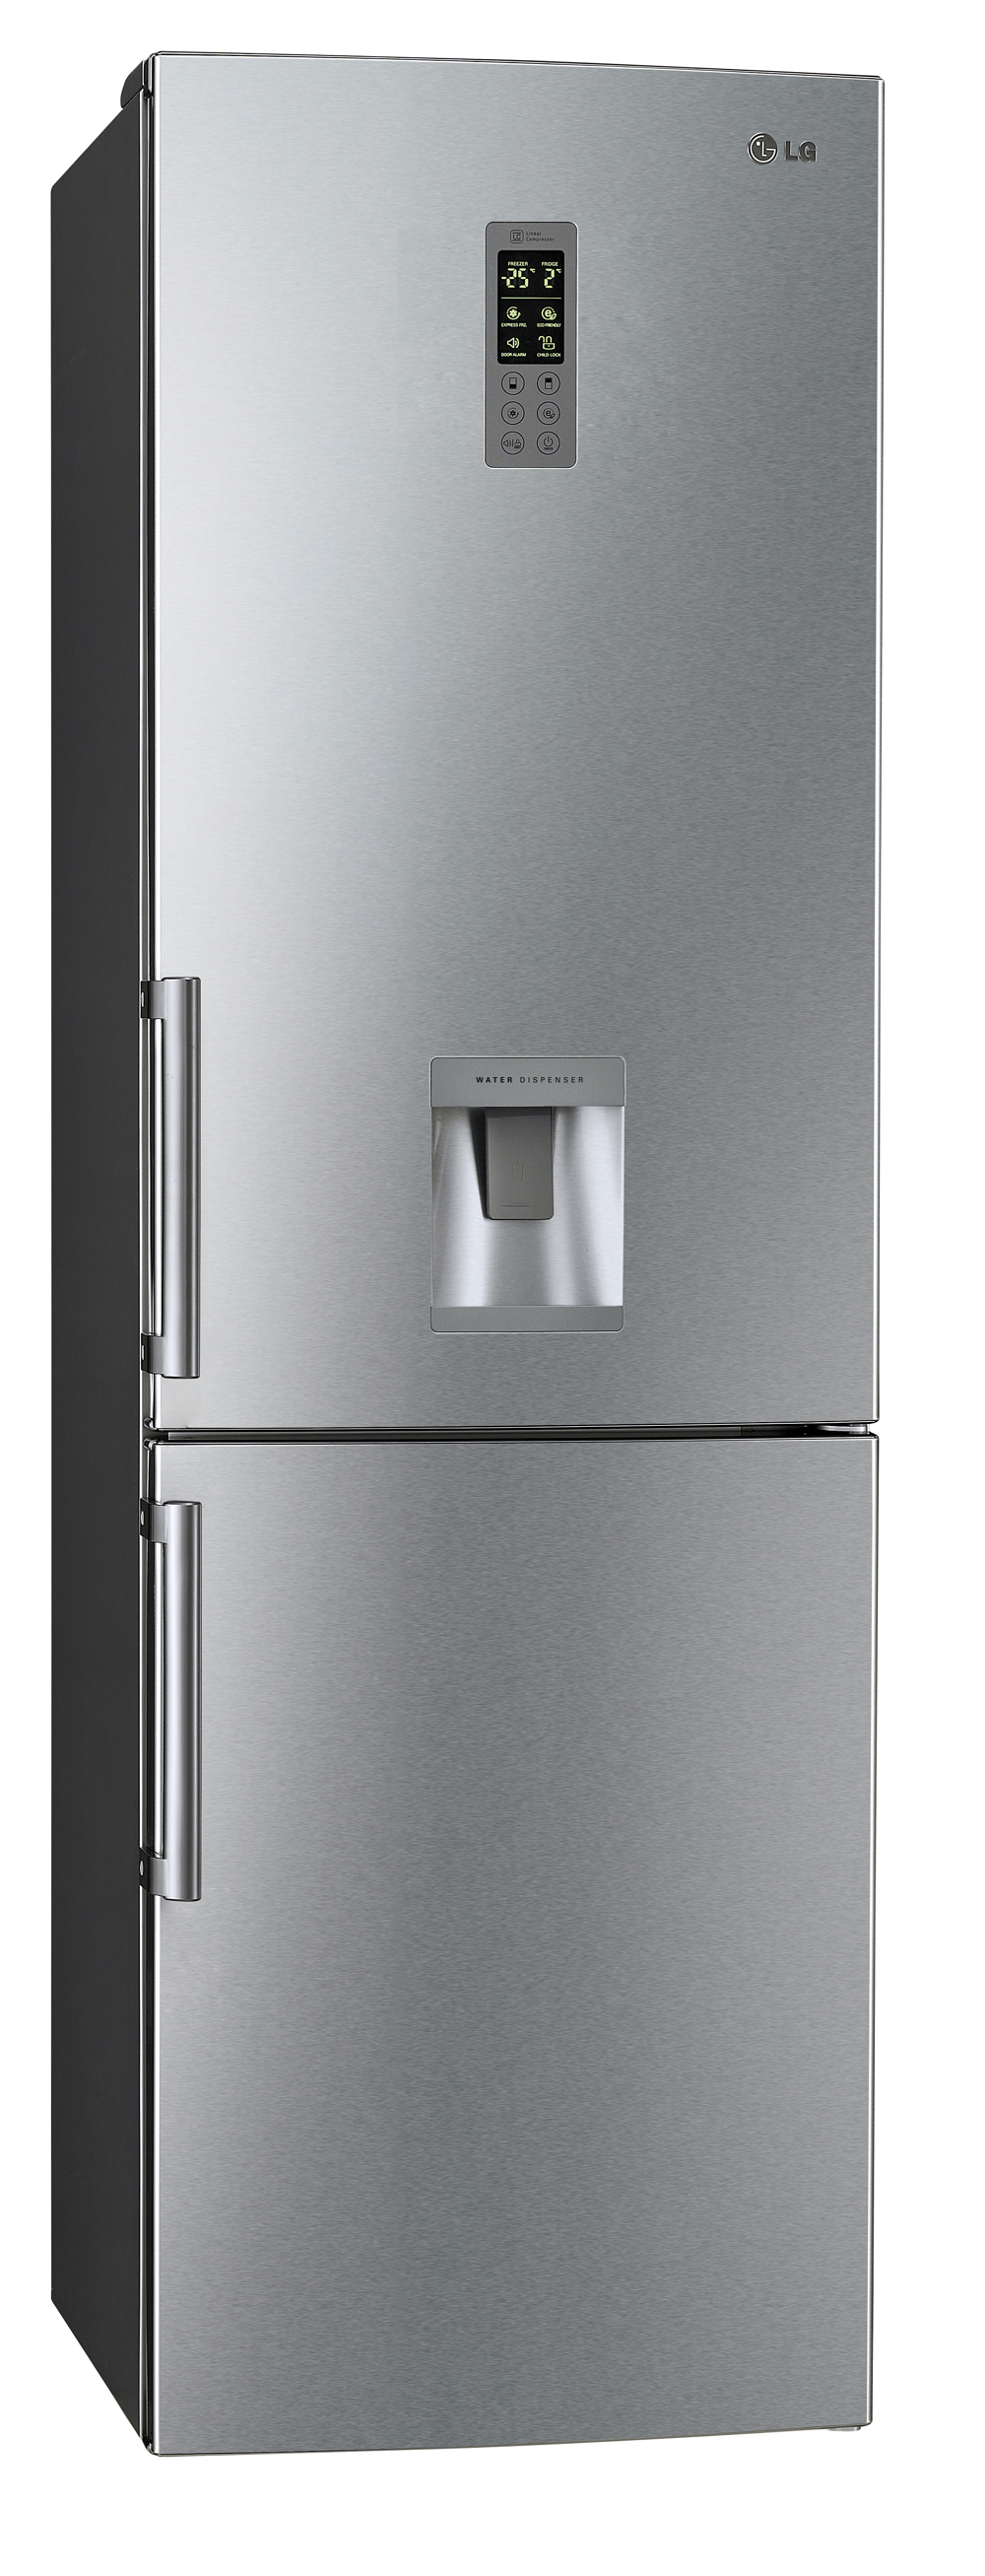 A front view of LG's Botton Freezer Refrigerator